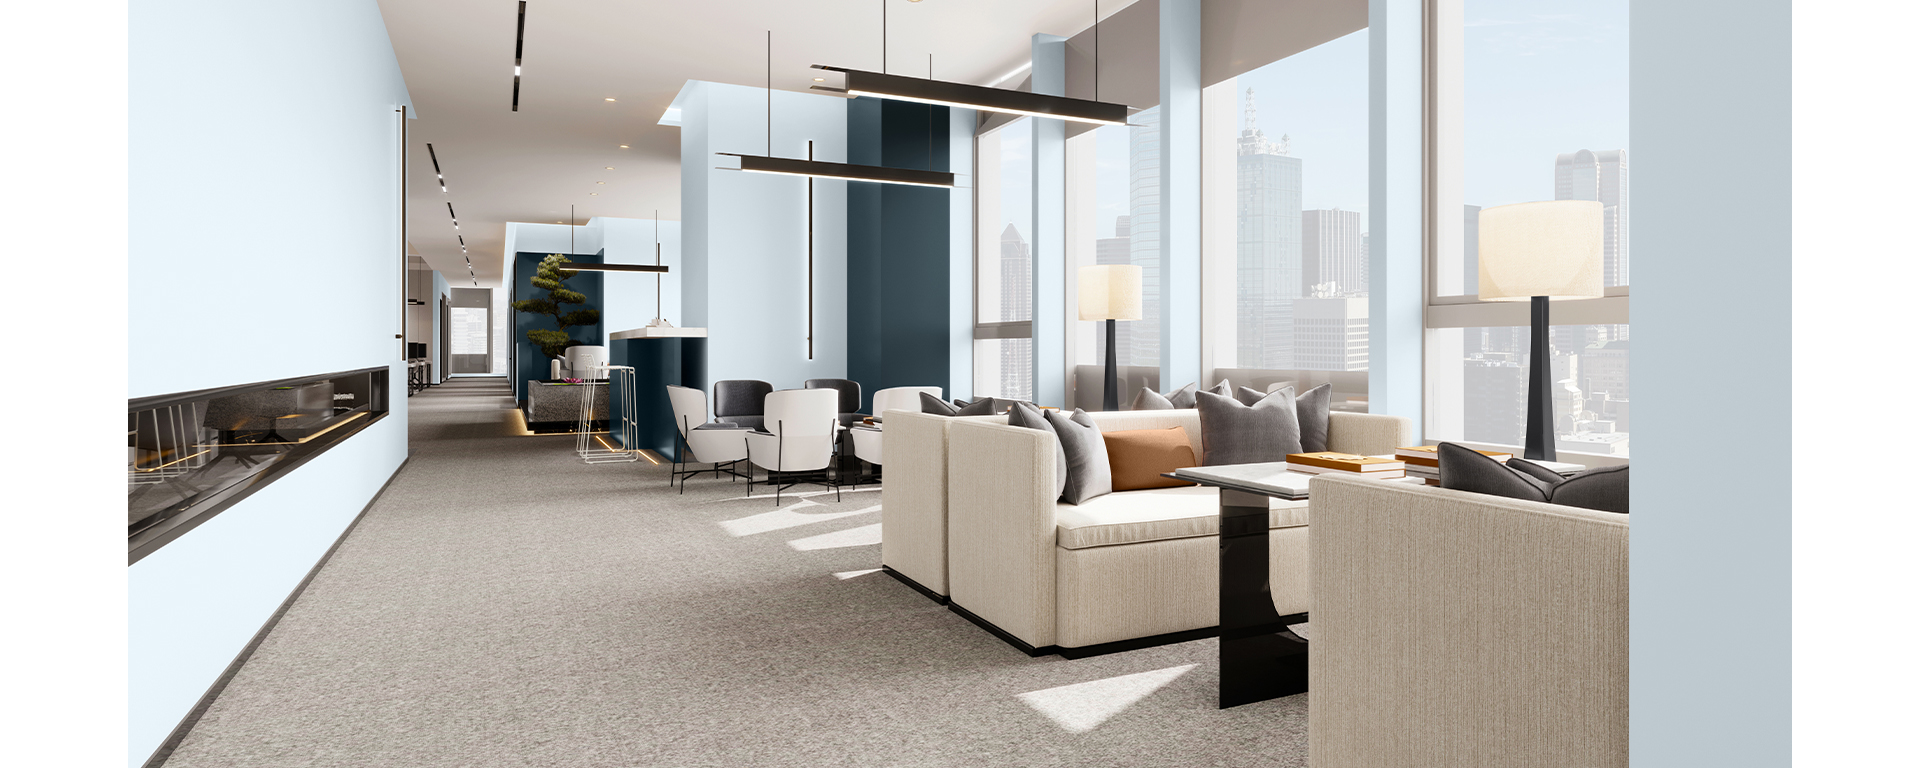 Urban interior with comfortable beige seating, floor-to-ceiling windows overlooking cityscape, light and dark blue color scheme with gray and black hardware and accessories.